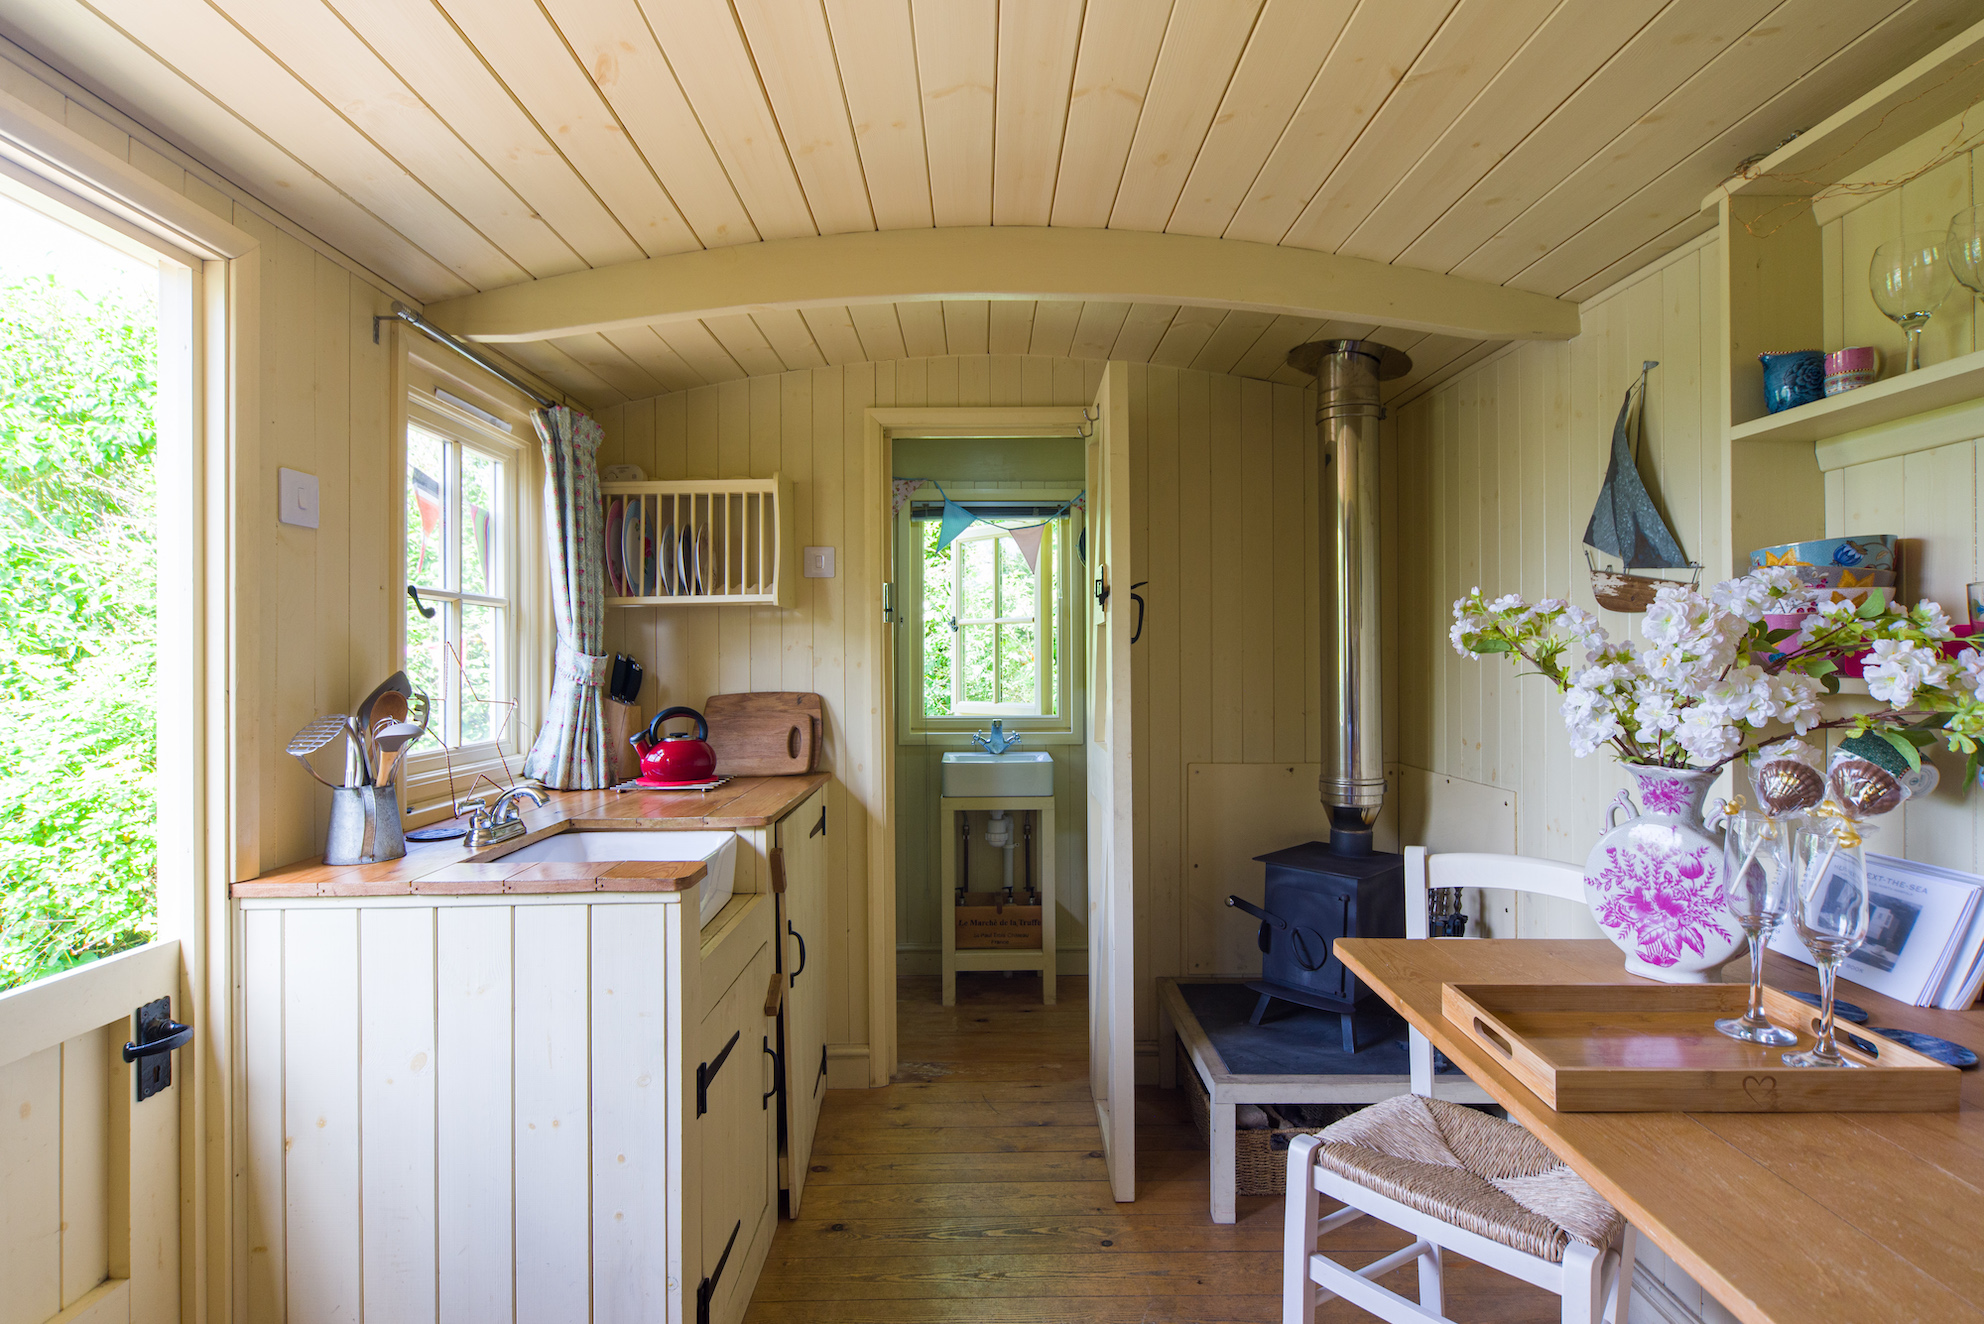 Interior of the self-catering shepherd's hut available as holiday accommodation in Wells-next-the-Sea